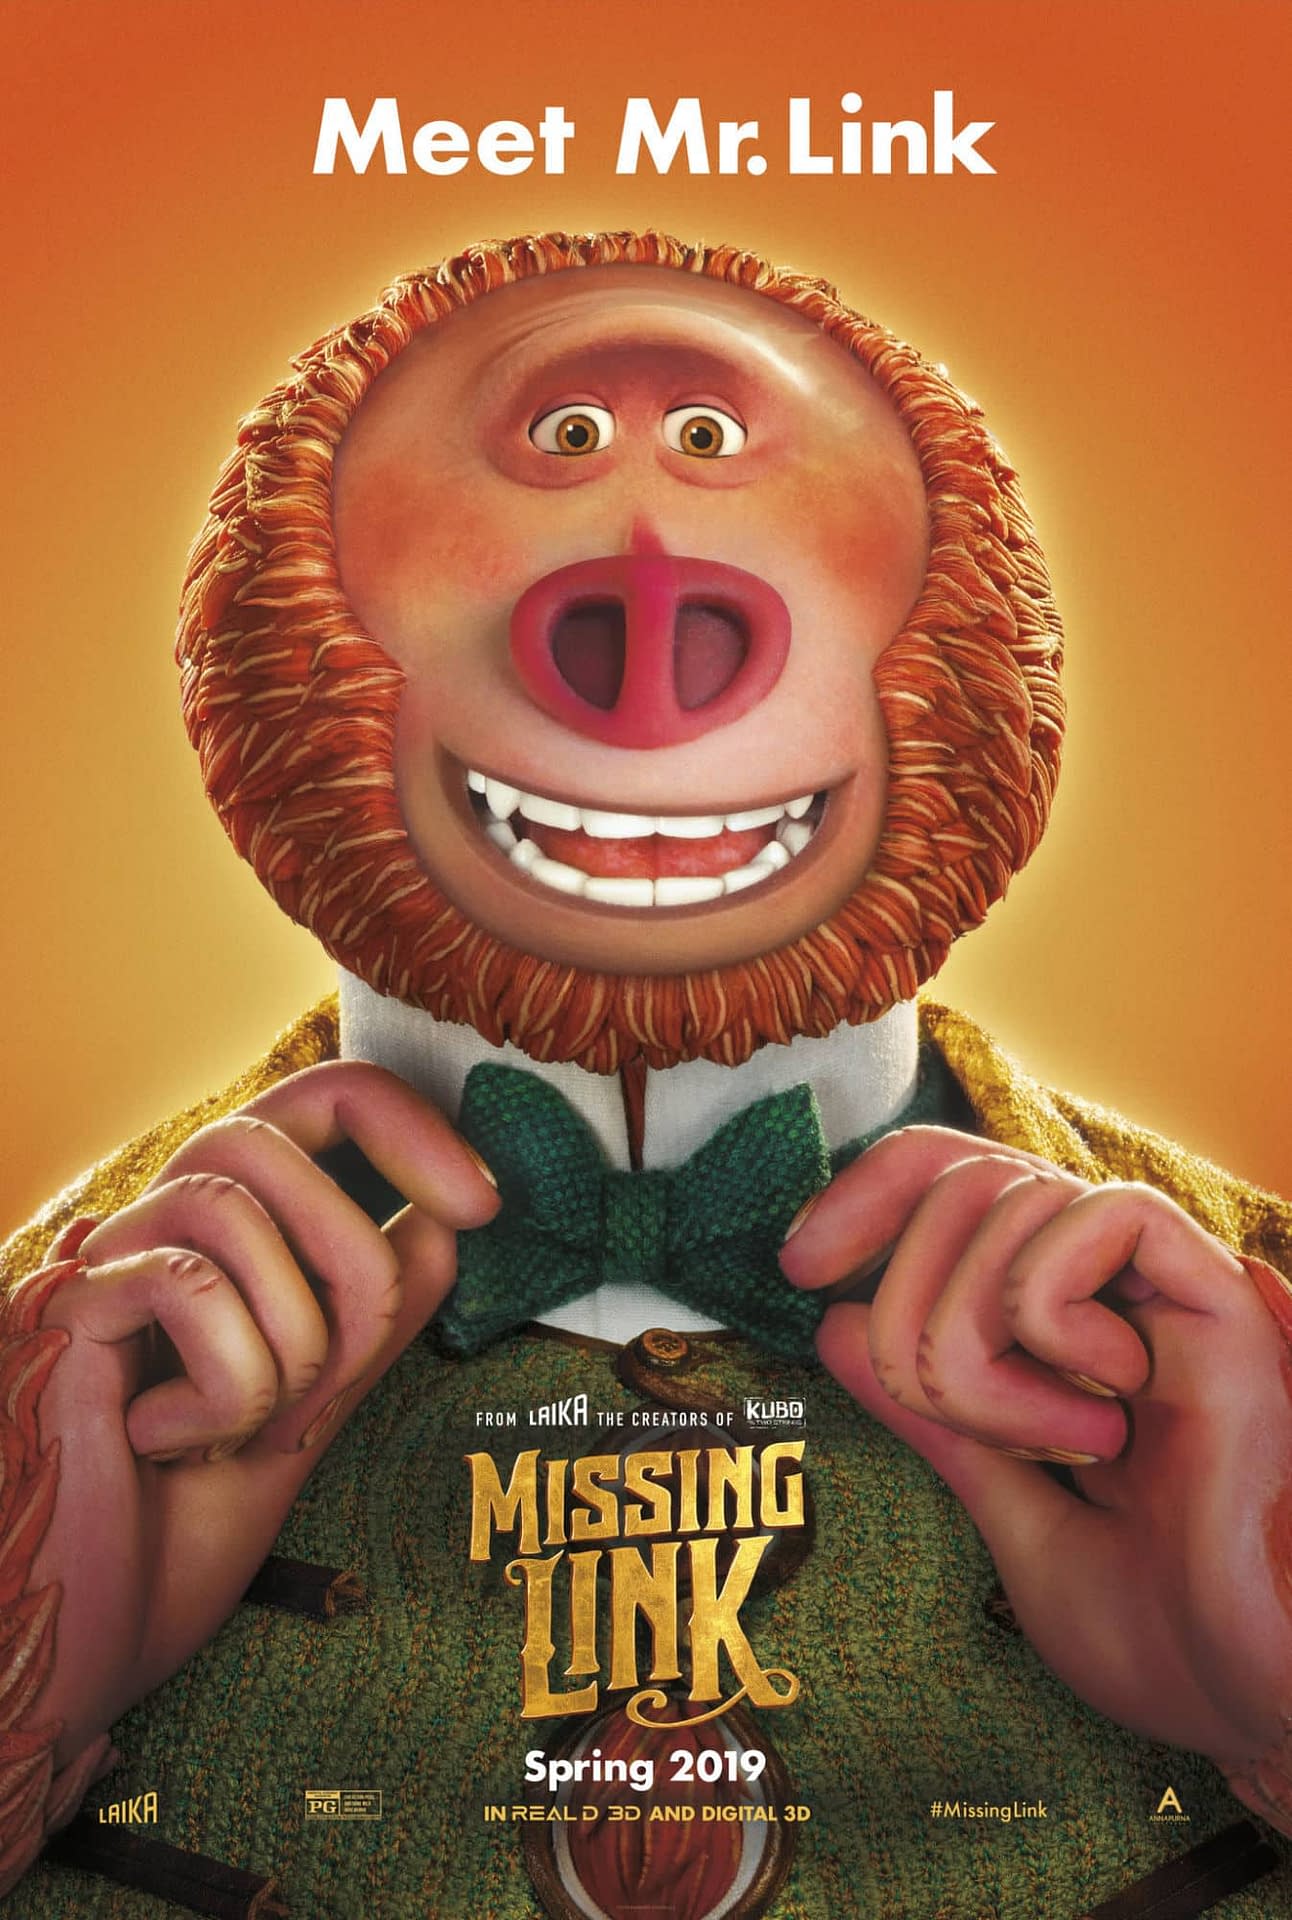 First Trailer and Poster for LAIKA's New Feature 'Missing Link'